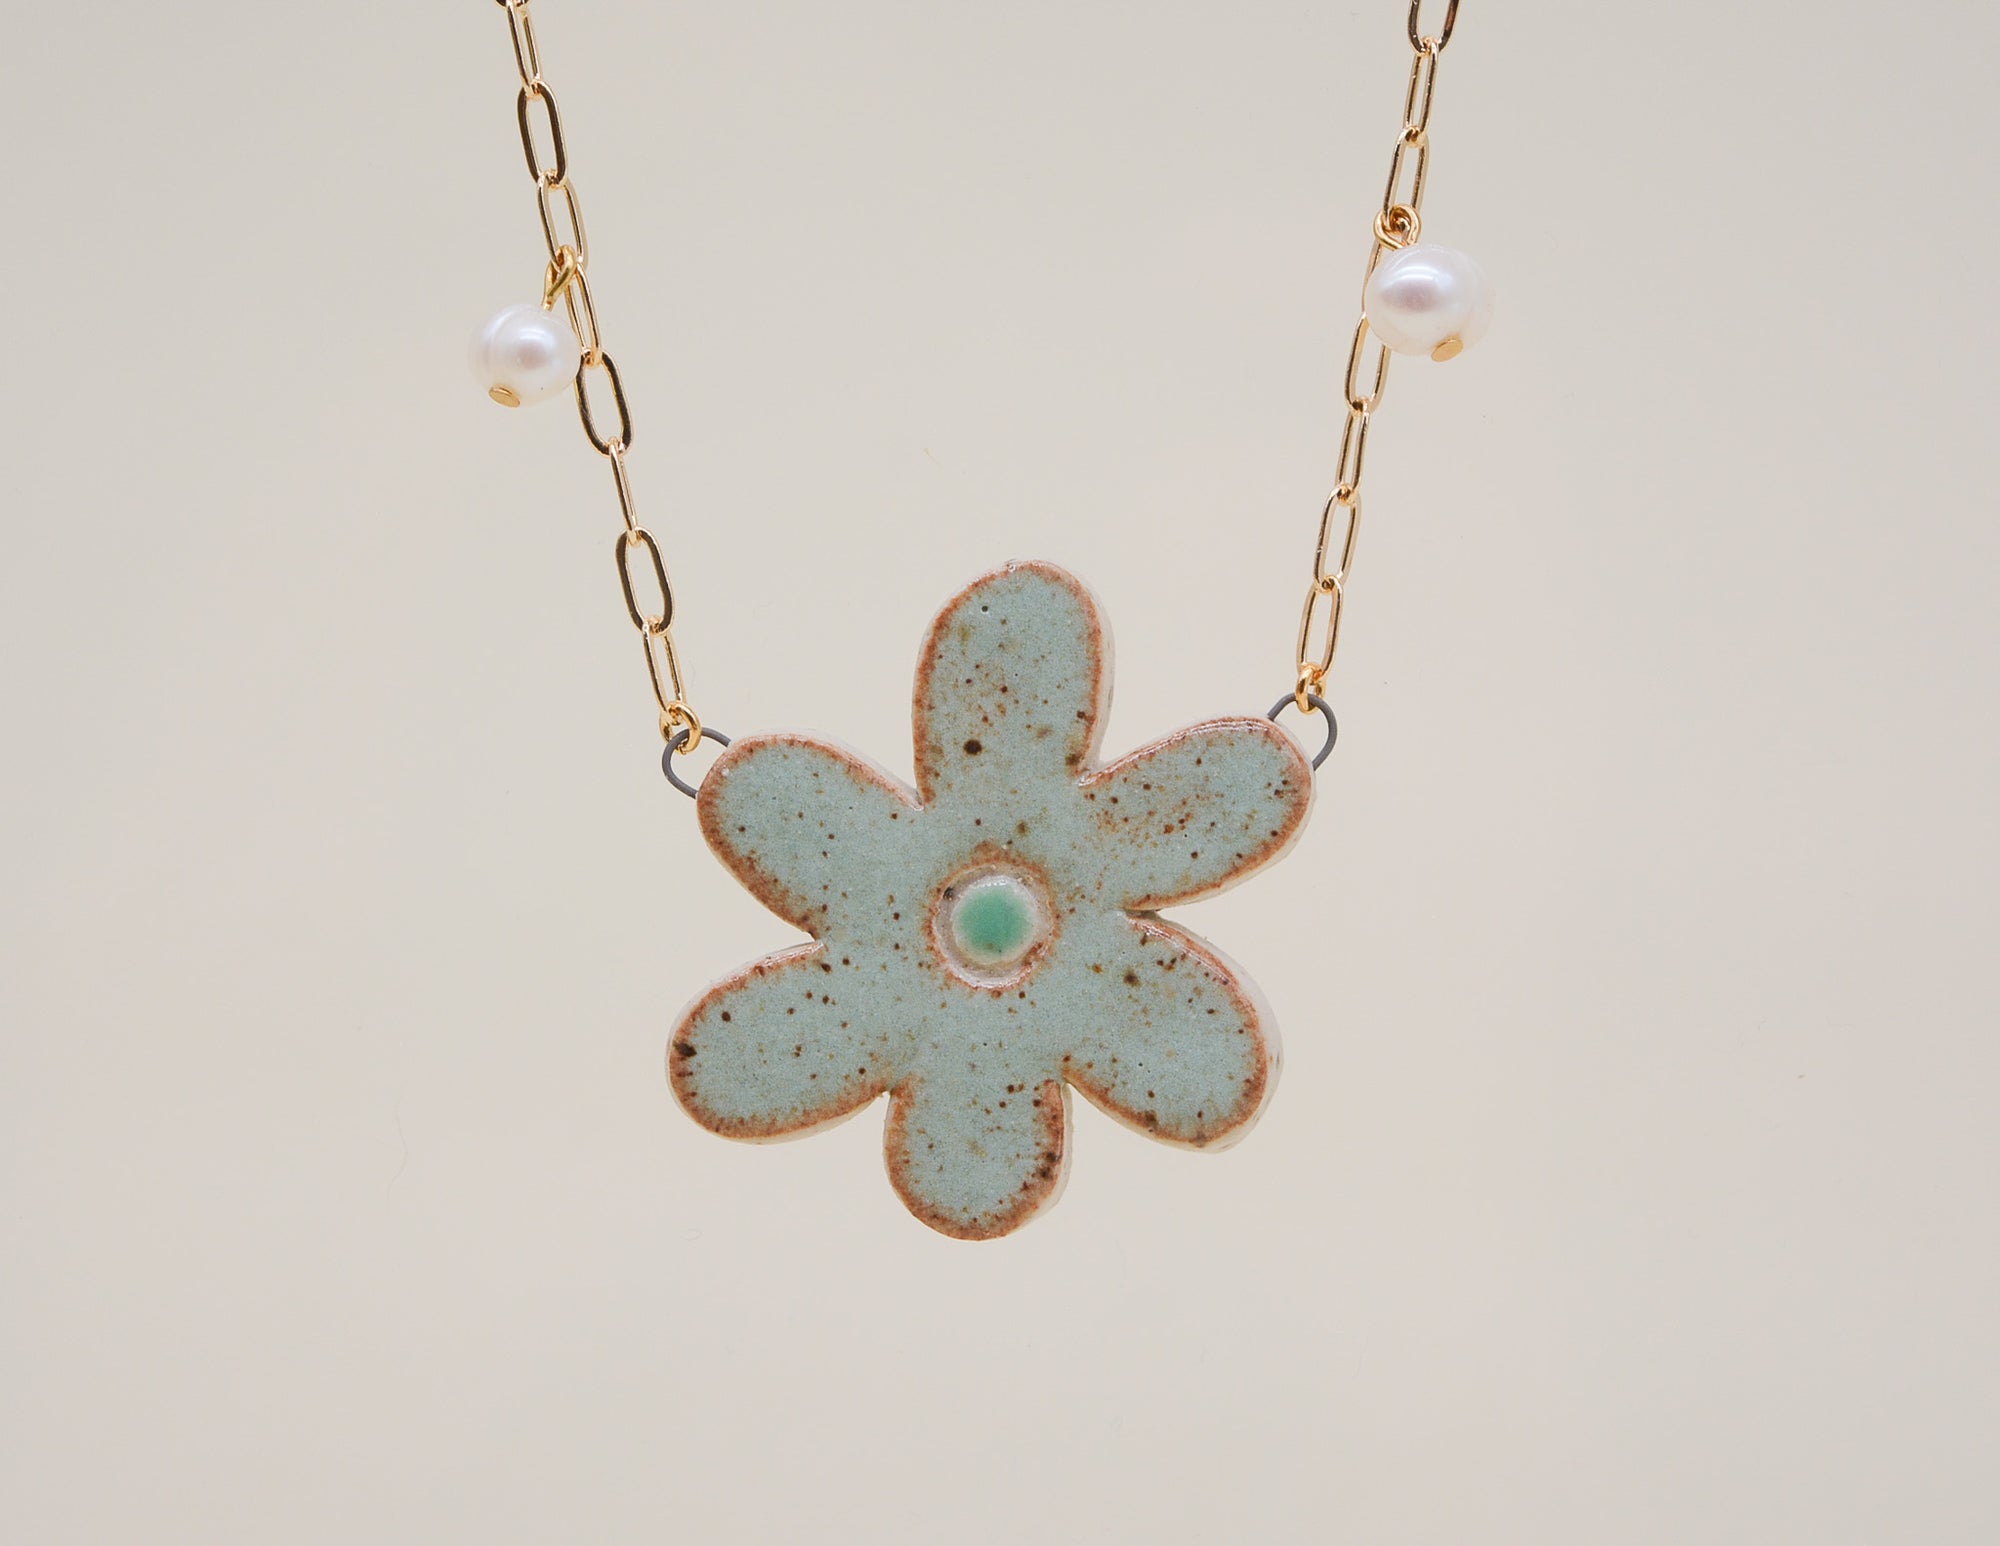 Green Daisy and Pearls Necklace